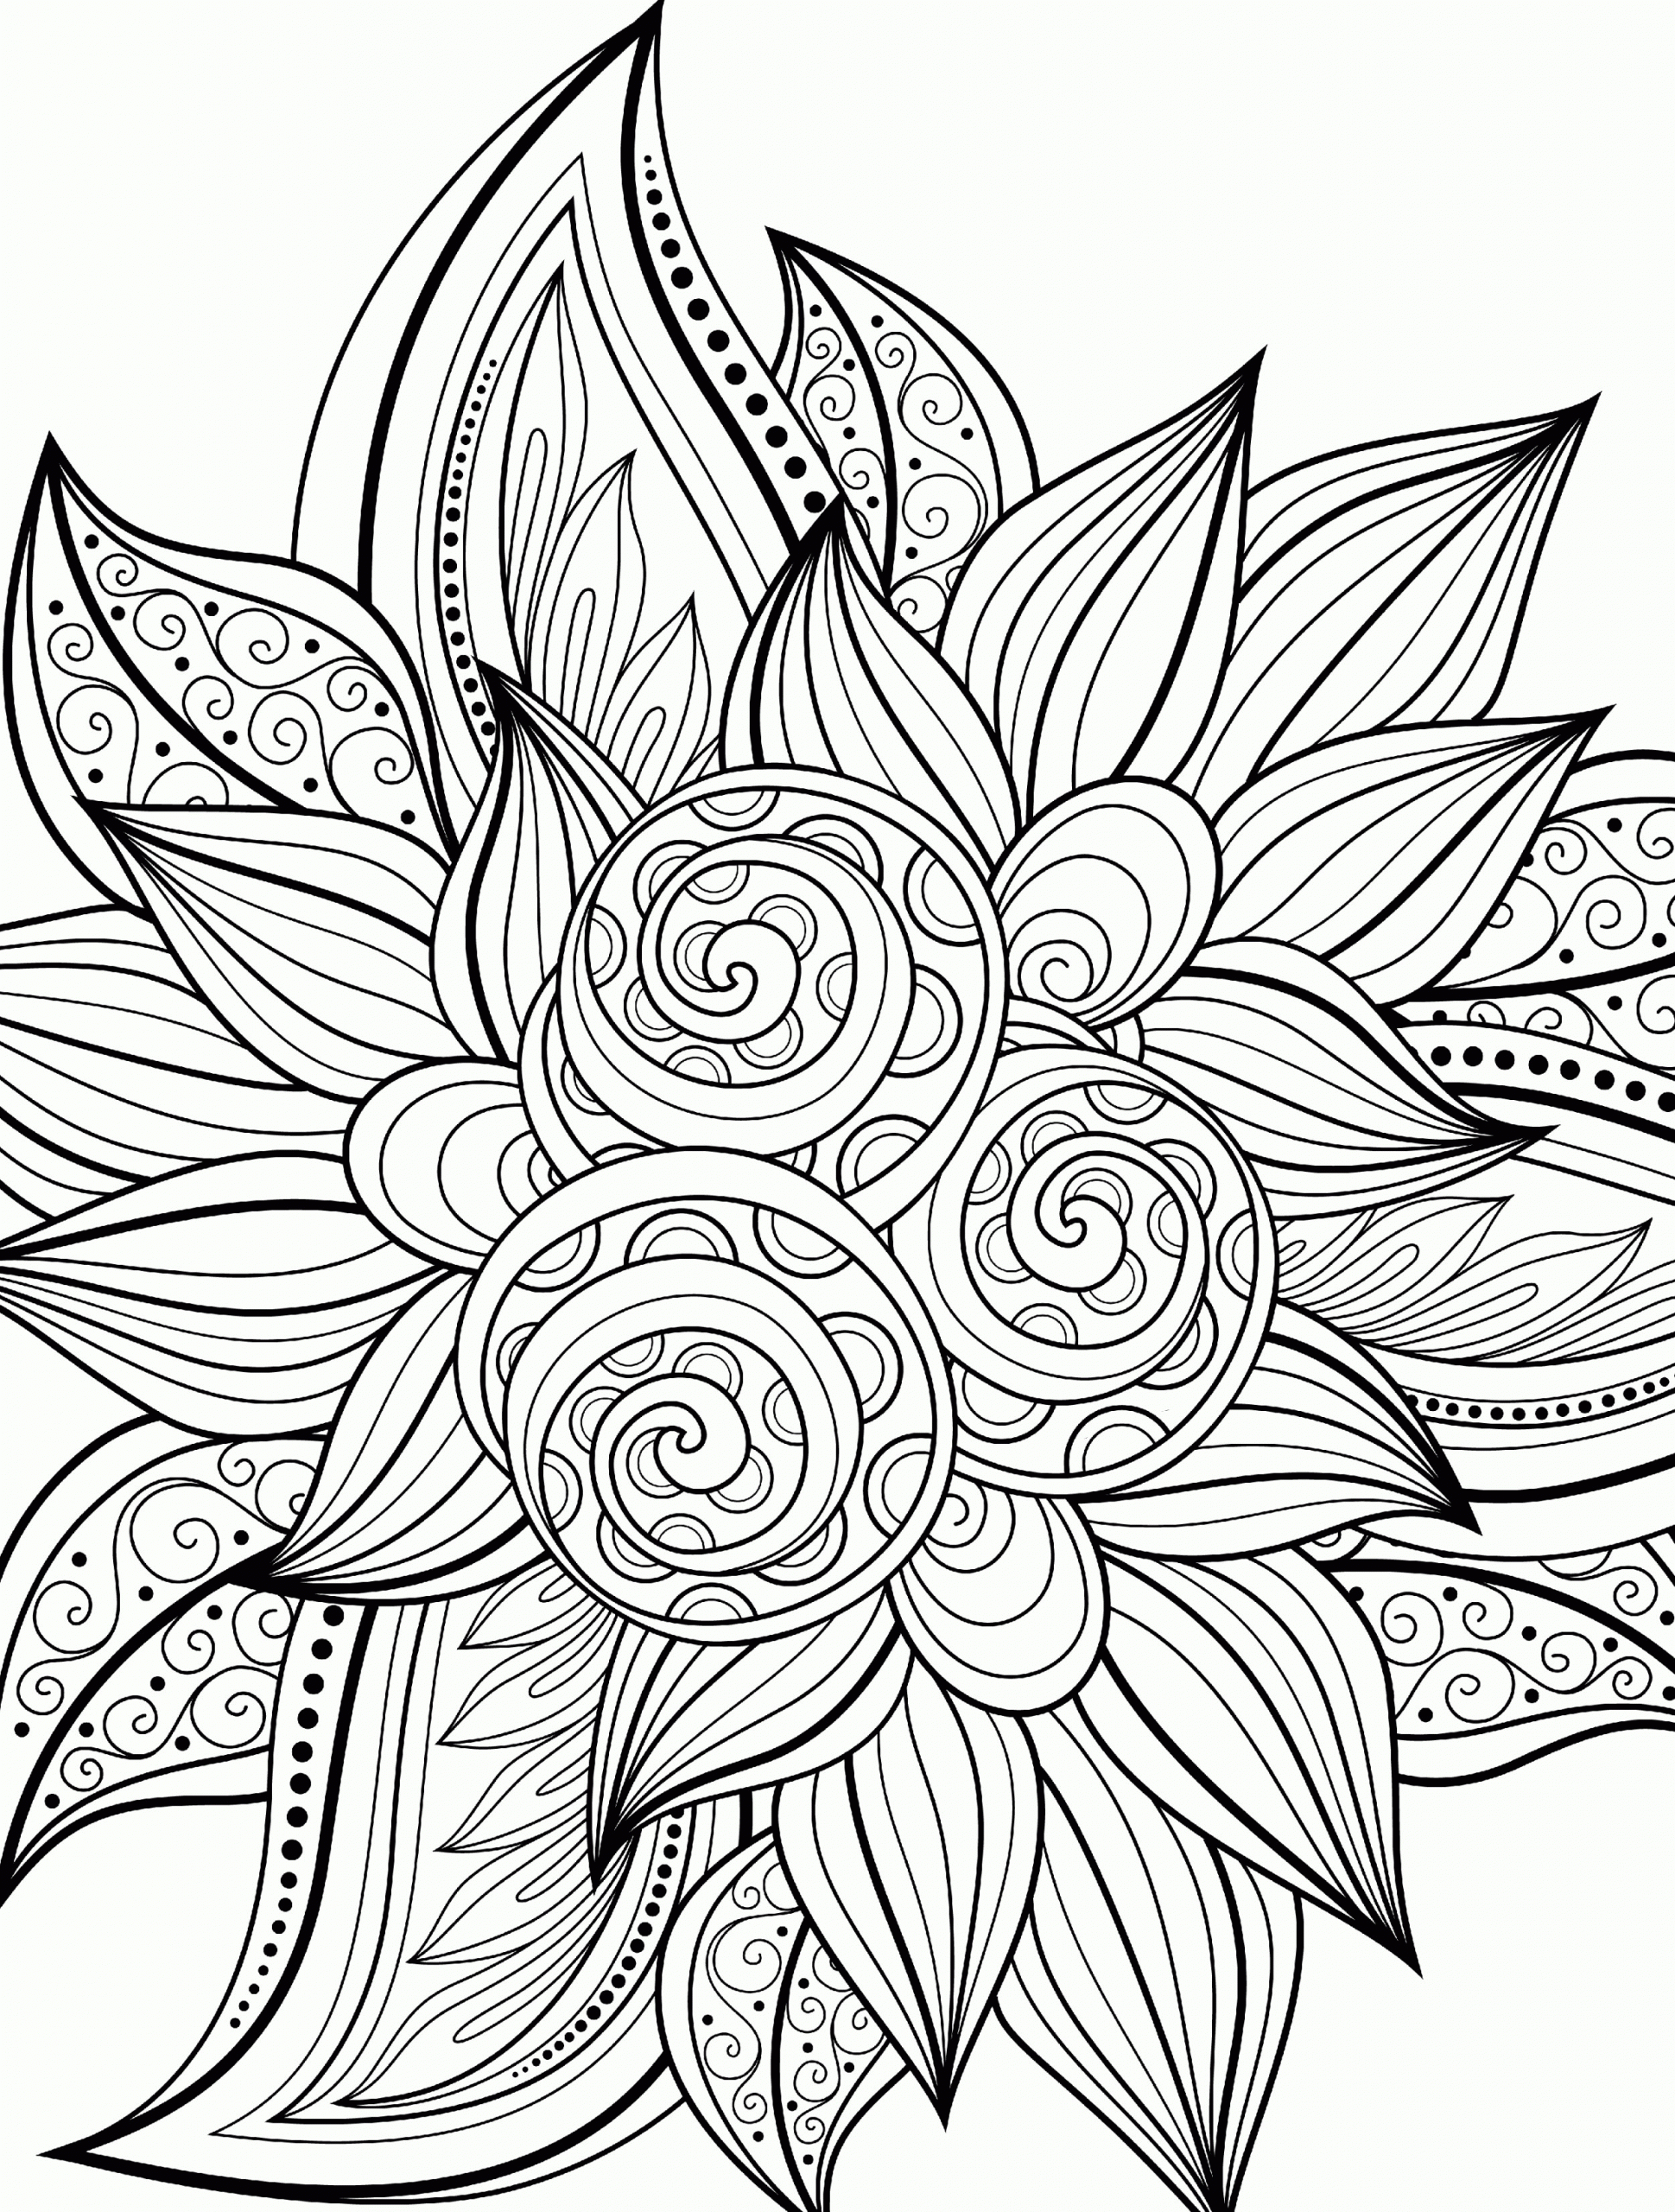 Adult Coloring Book Images
 Free Printable Coloring Pages Adults ly Coloring Home